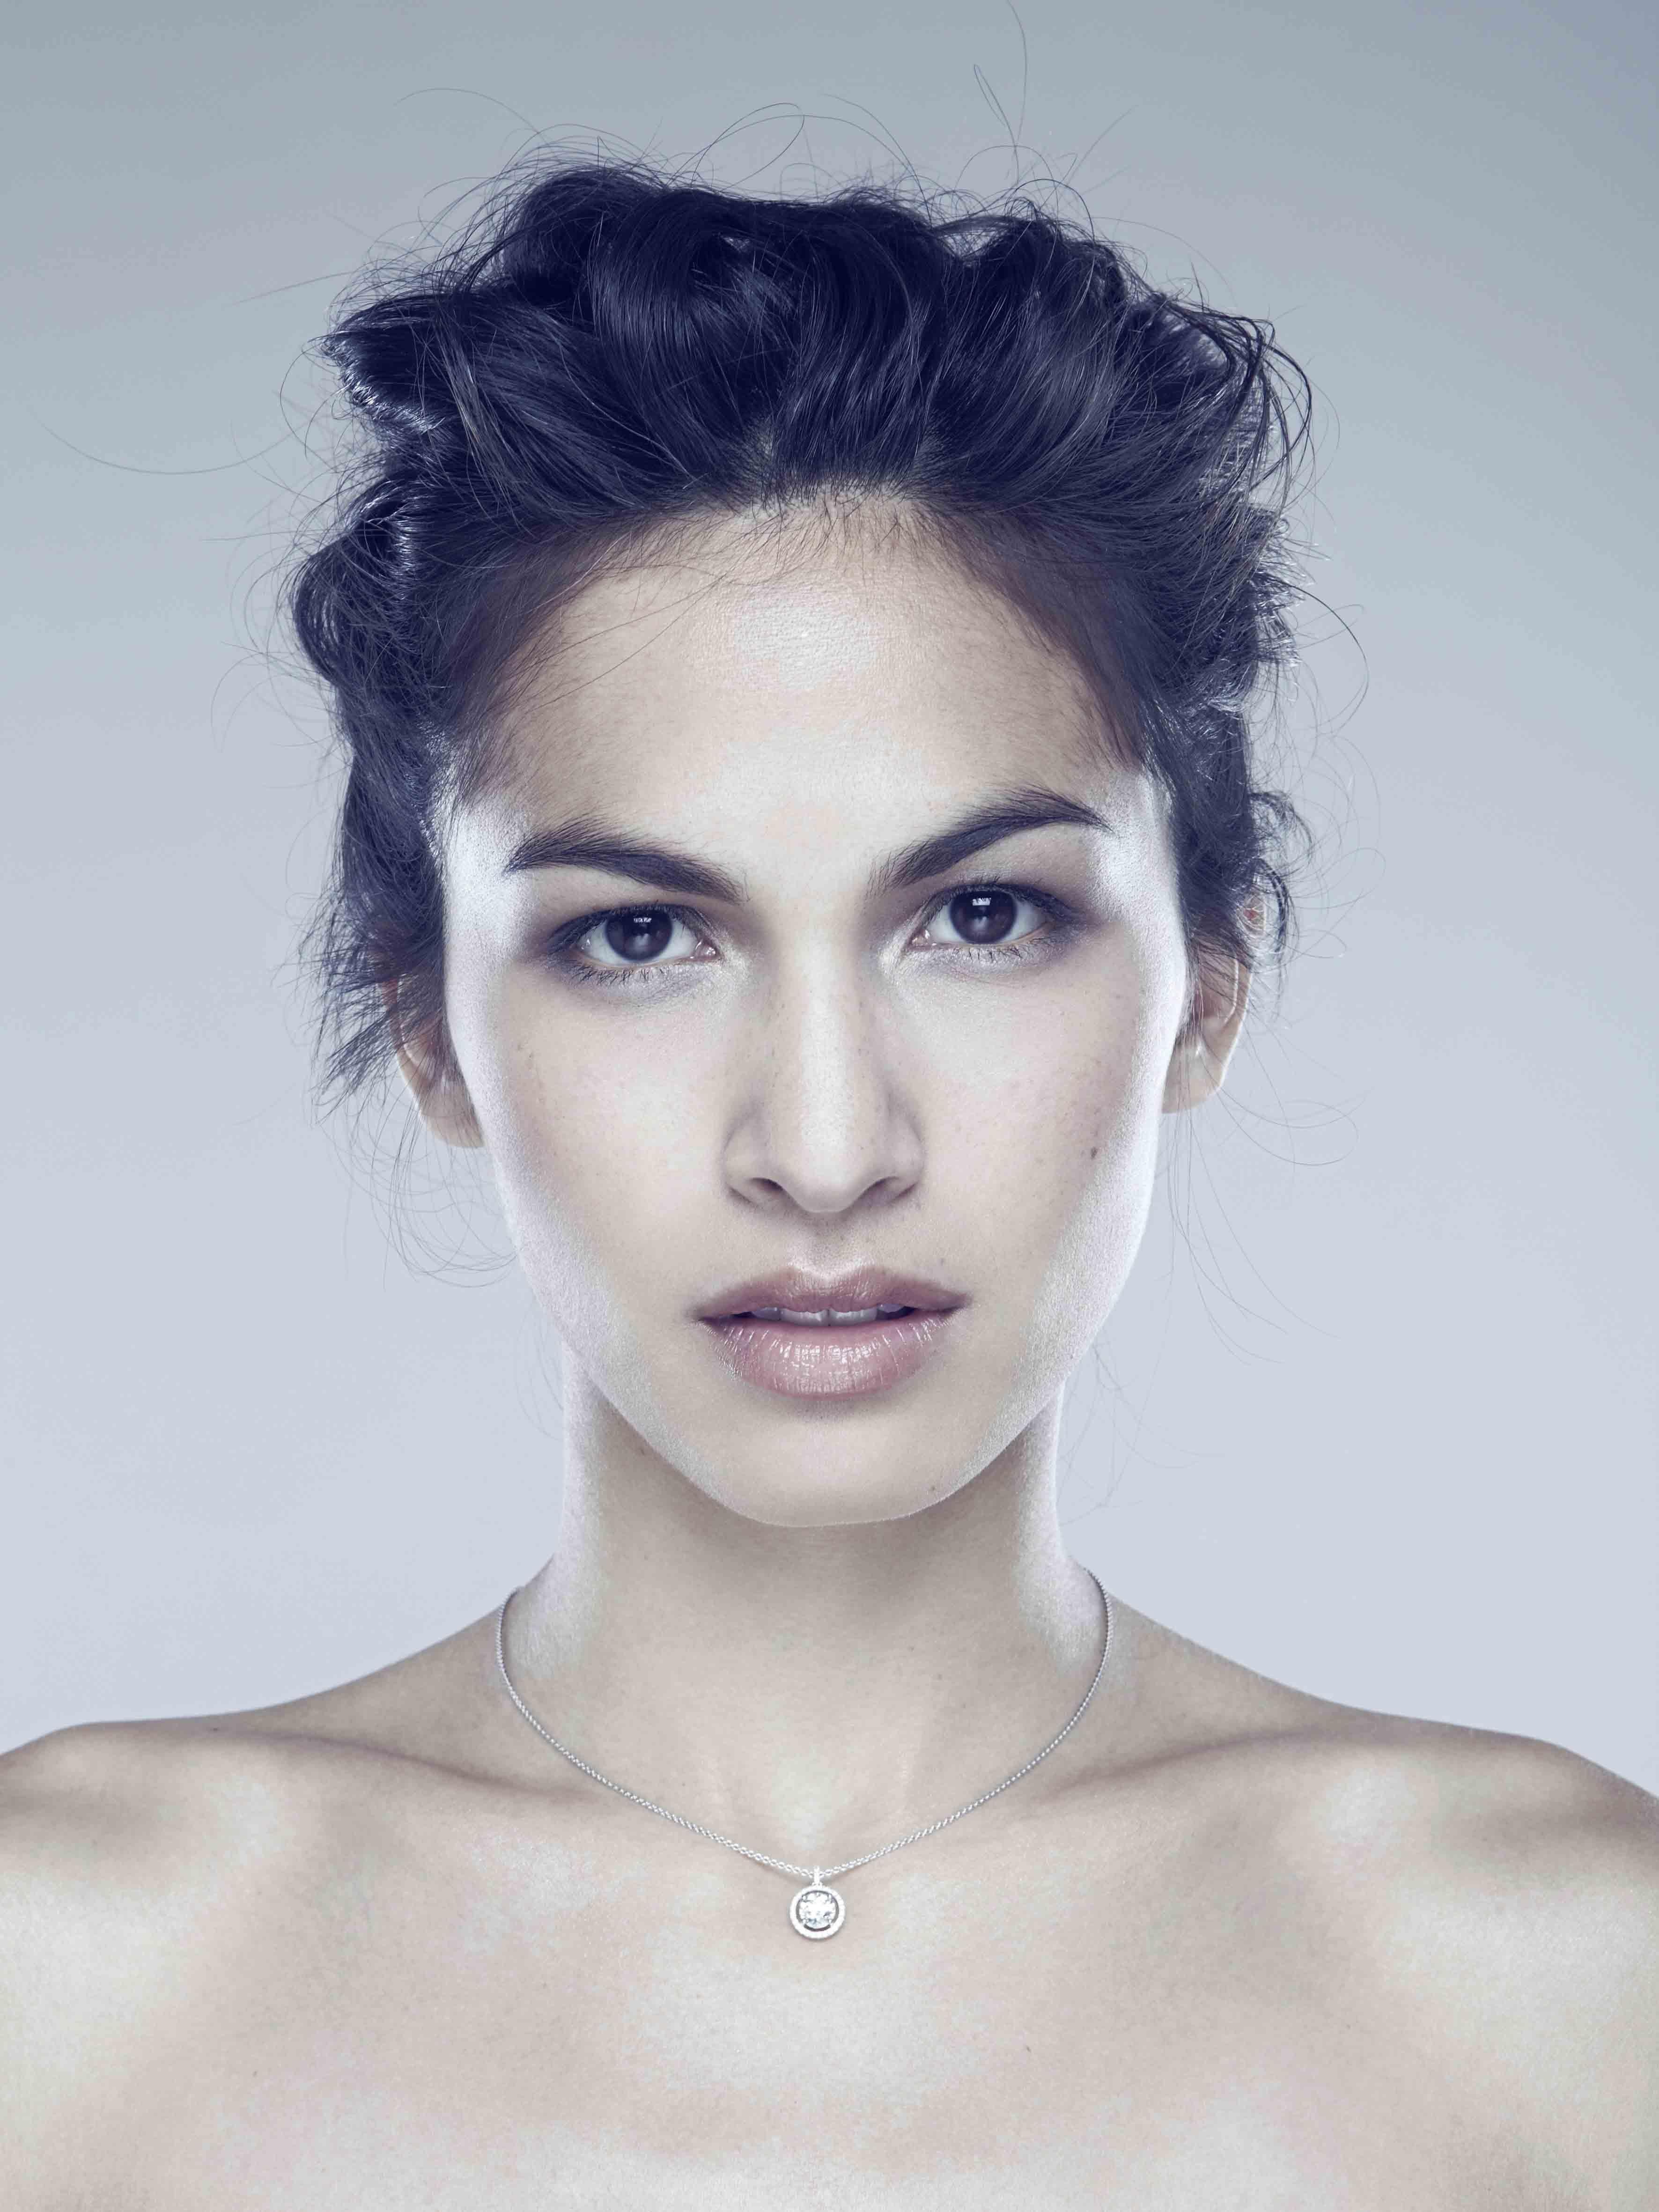 Elodie Yung Image. Full HD Picture